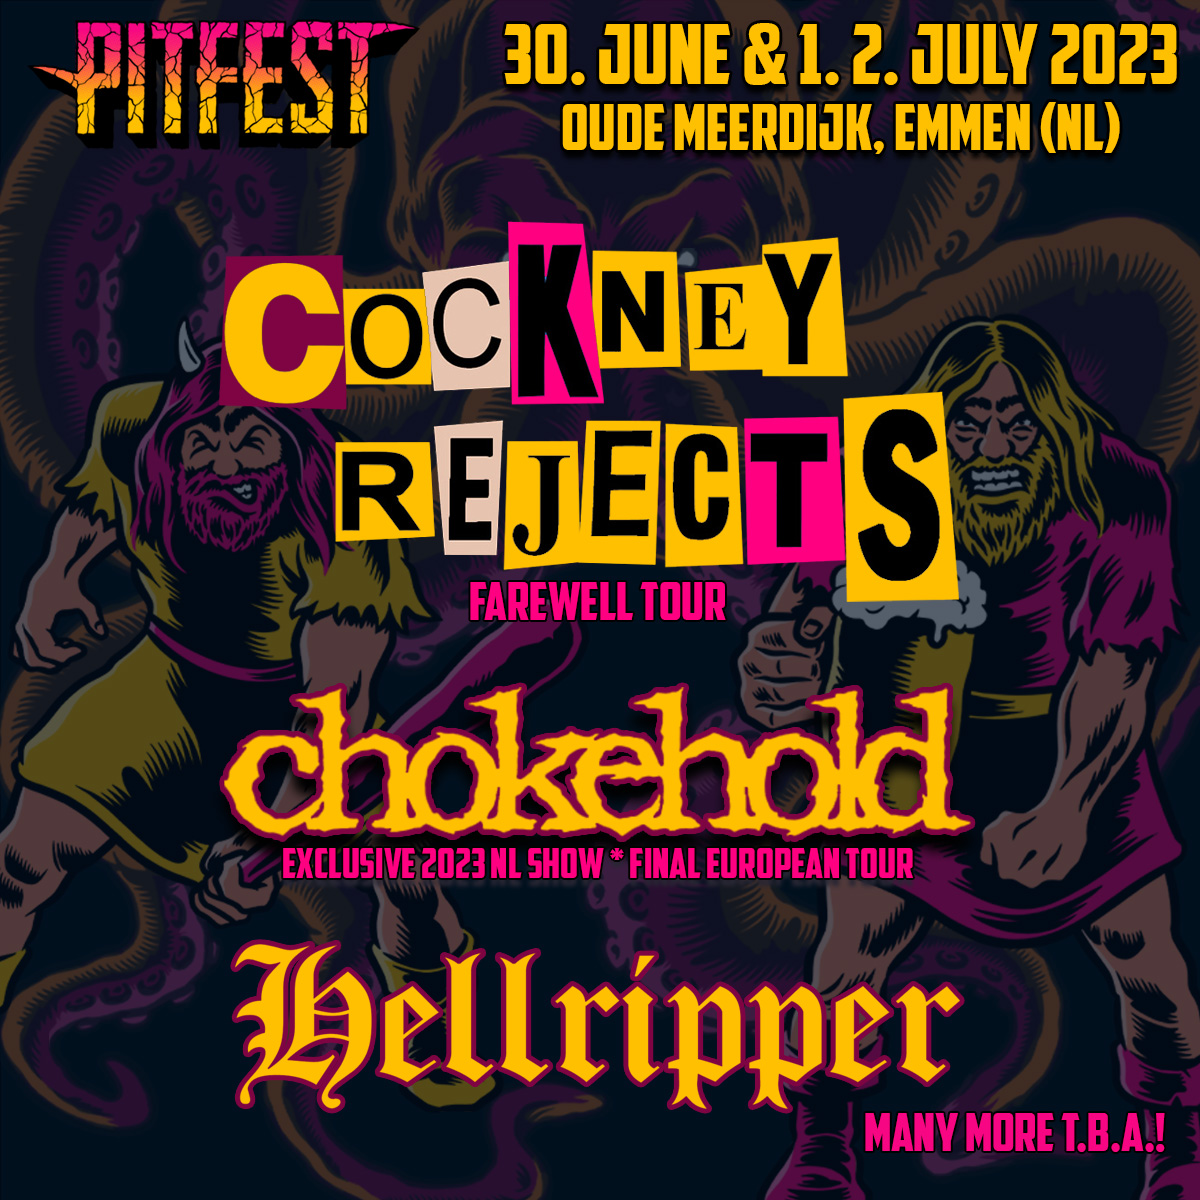 Cockney Rejects, Chokehold and Hellripper confirmed for Pitfest 2023